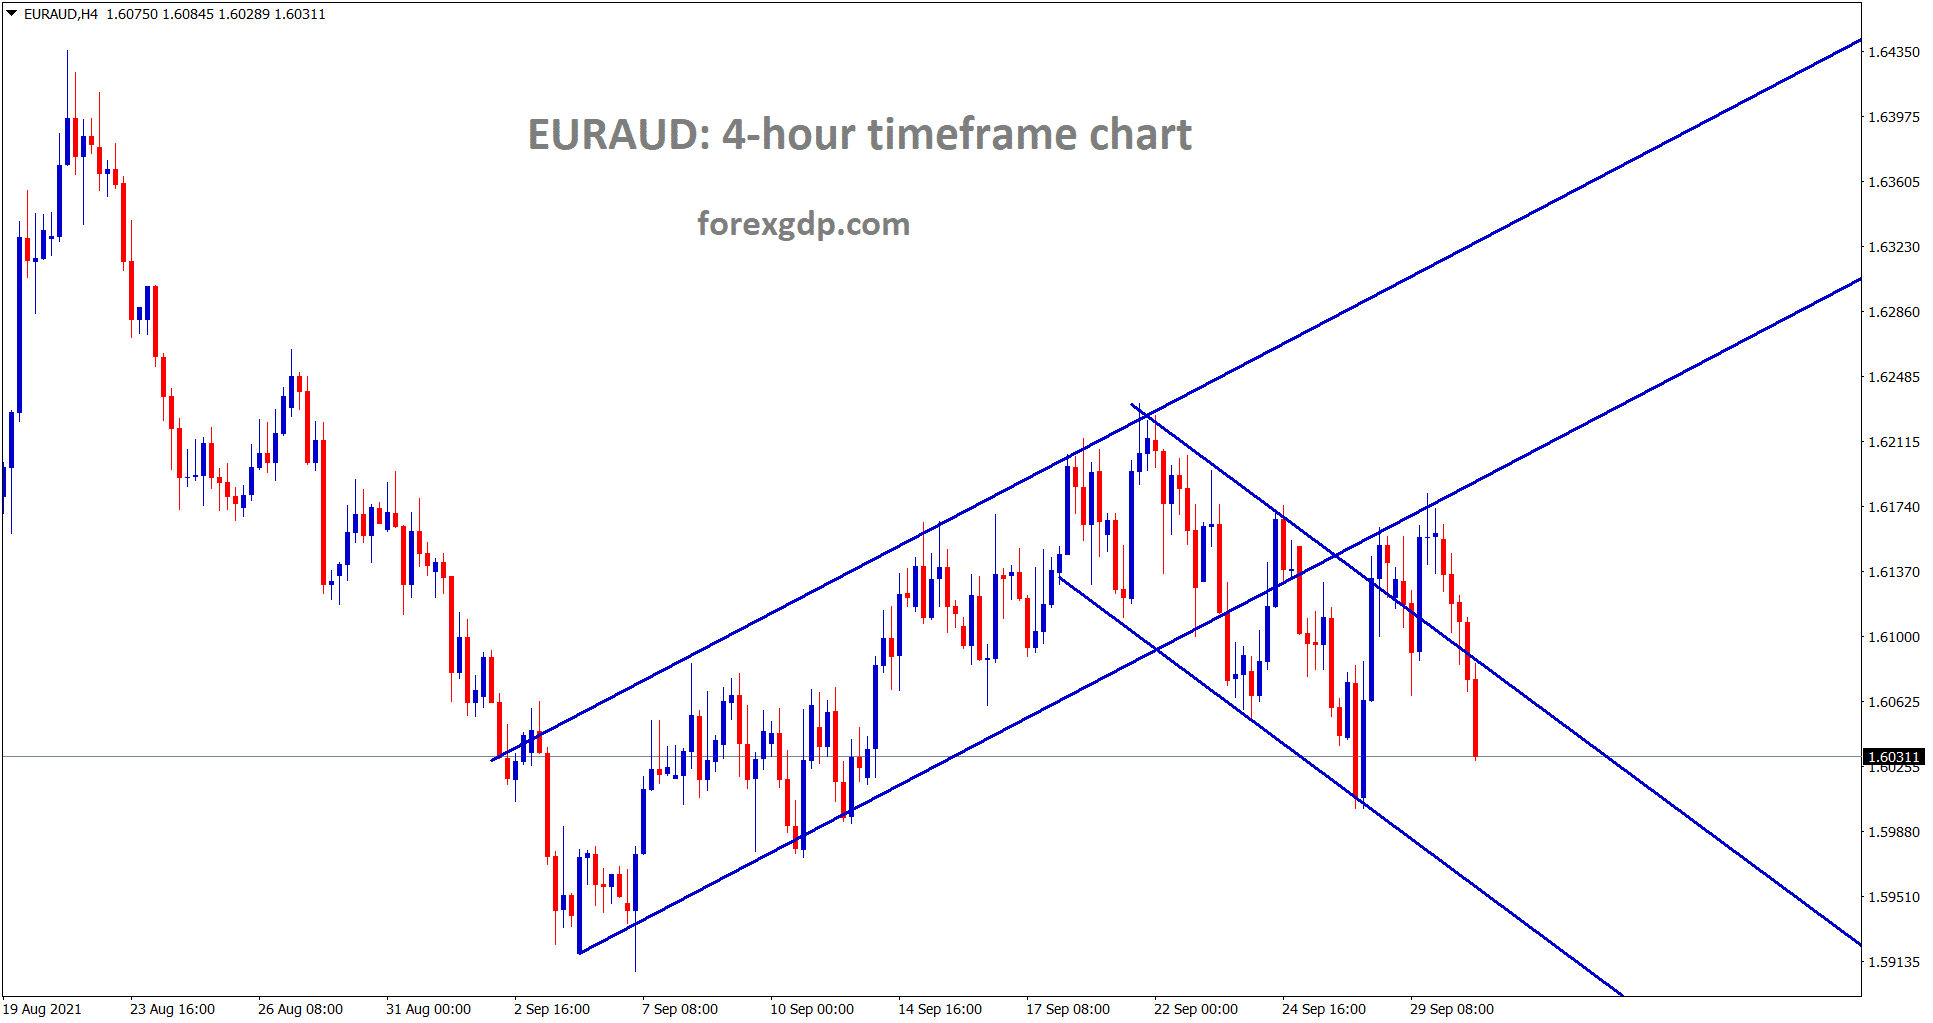 EURAUD is falling now after retesting the previous ascending channel